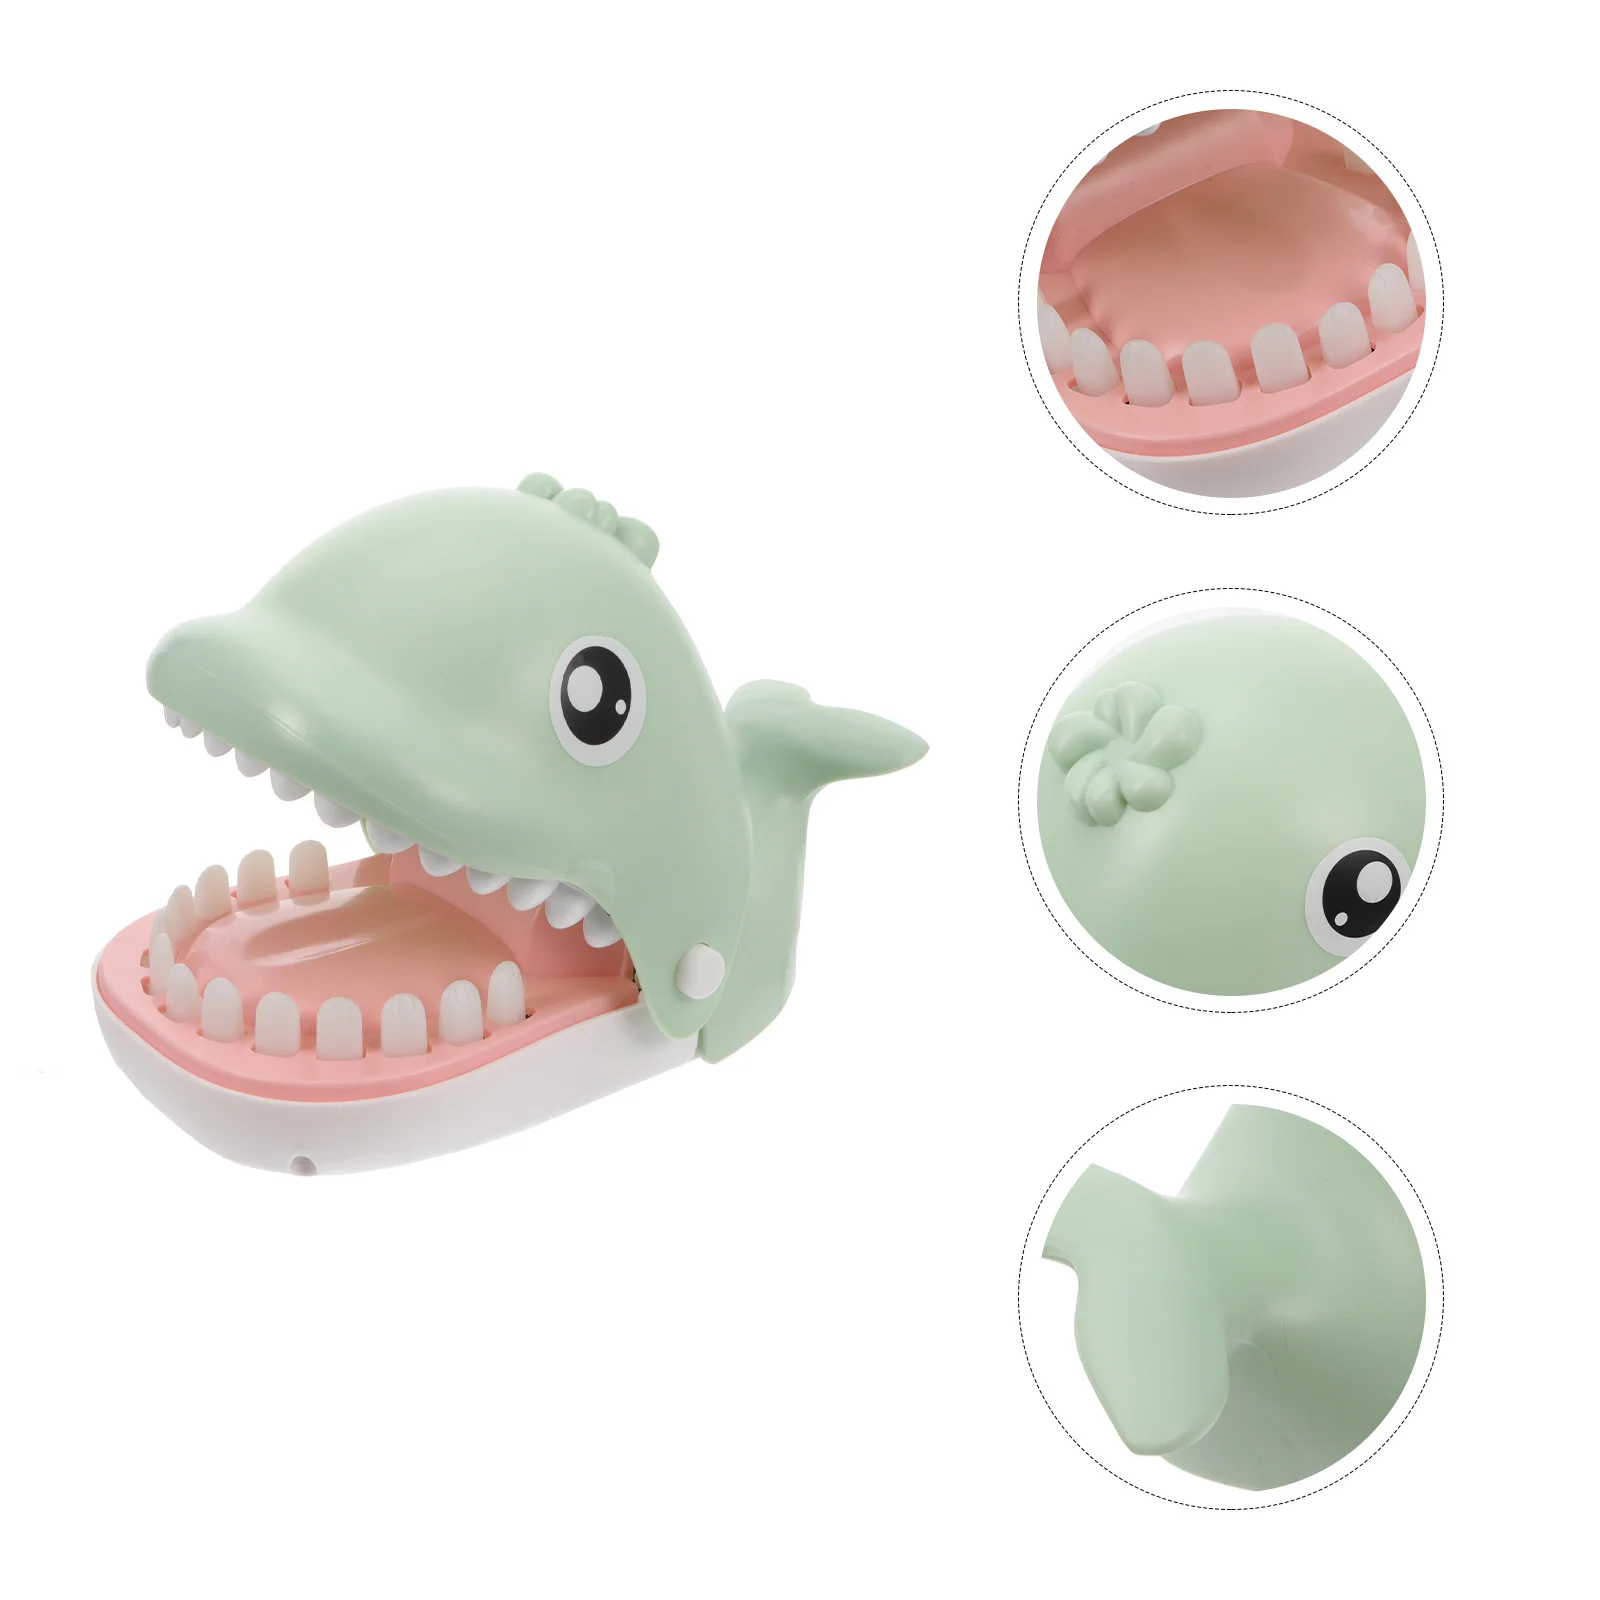 

Table Games Green Toy Trick Finger Biting Earth Tones Joke Funny Plaything Plastic Teeth Child Children gift Toys